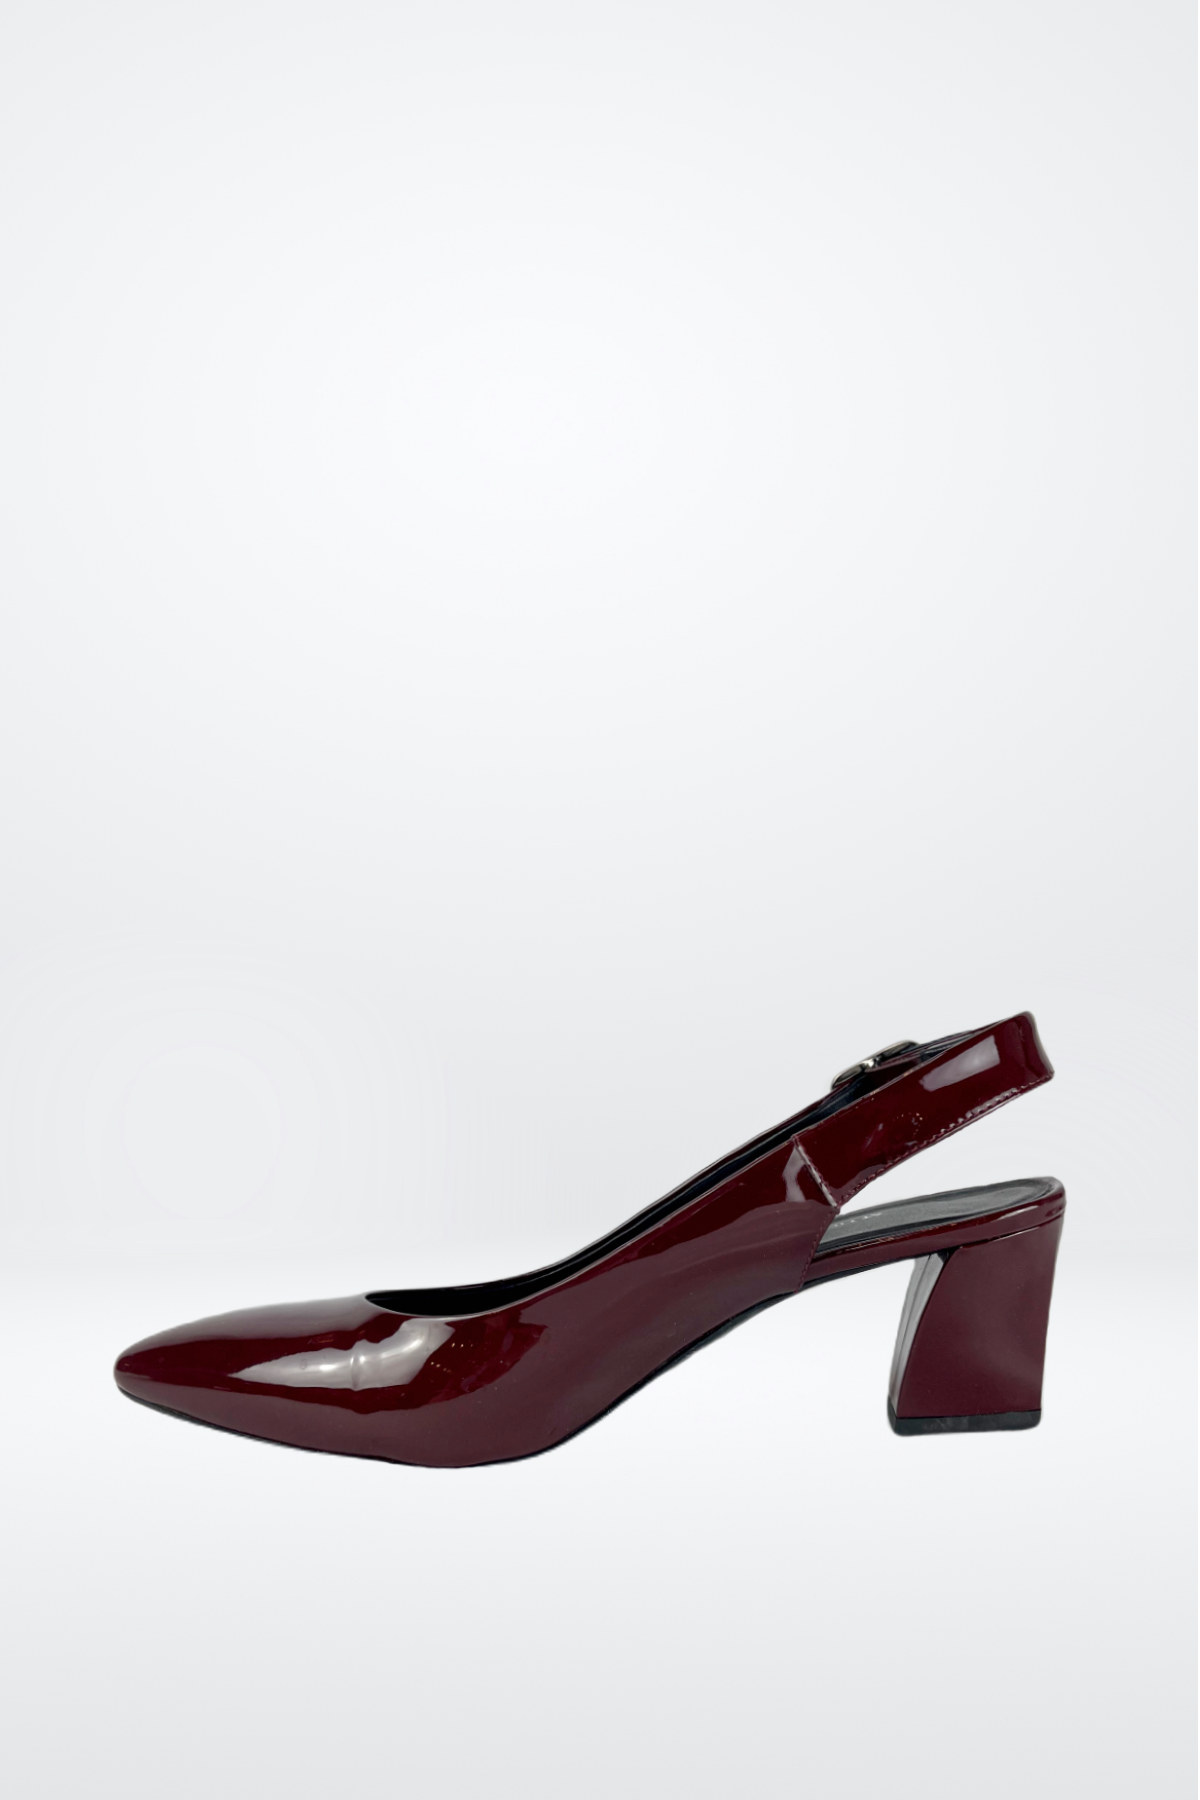 AGL Red Wine Leather Pointed Toe Buckle Ankle Pumps